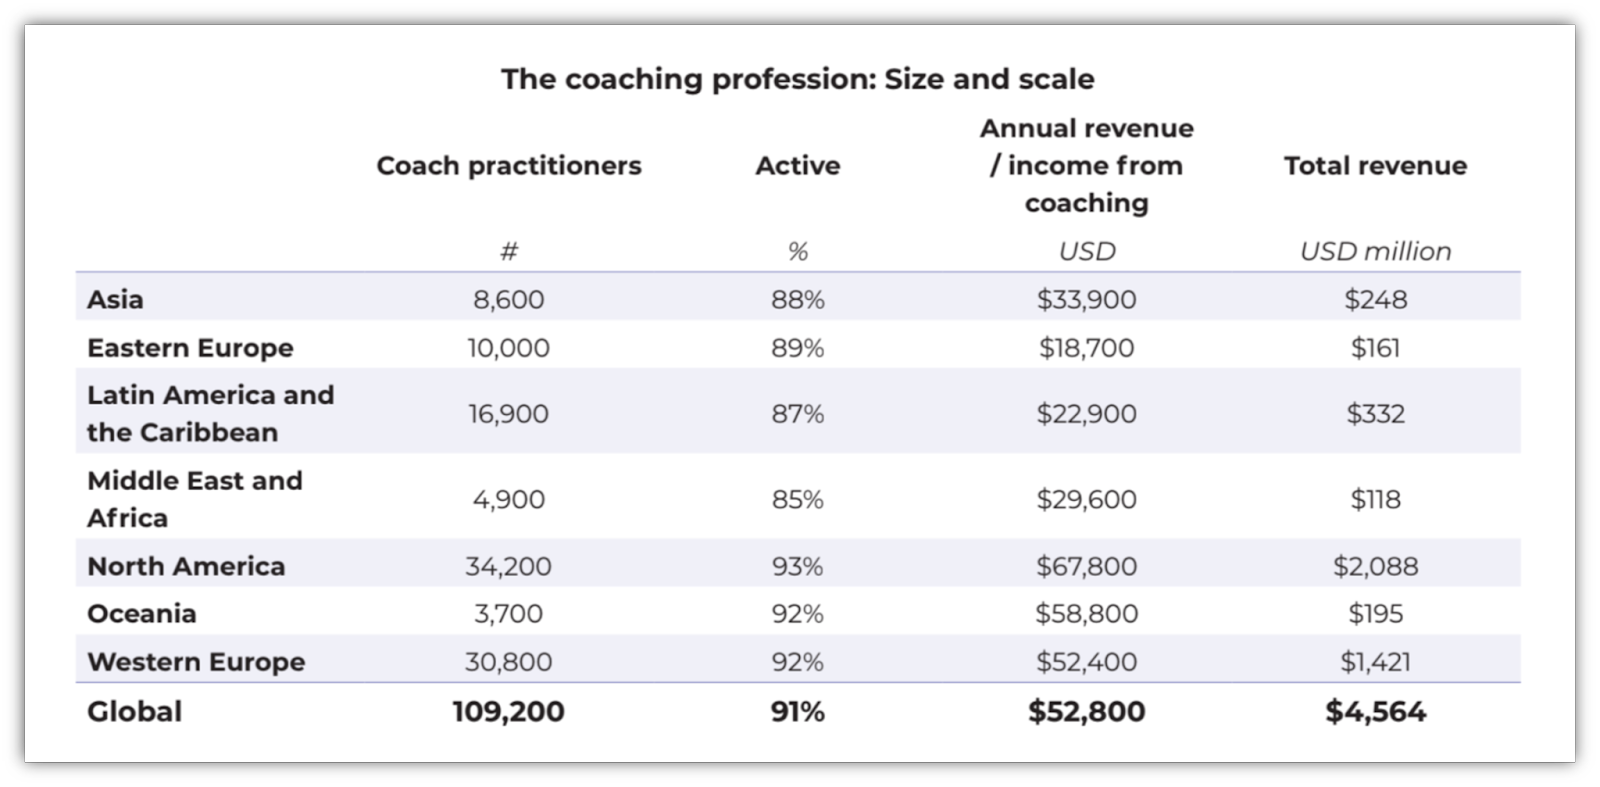 Table showing the distribution of coaching practitioners around the world.